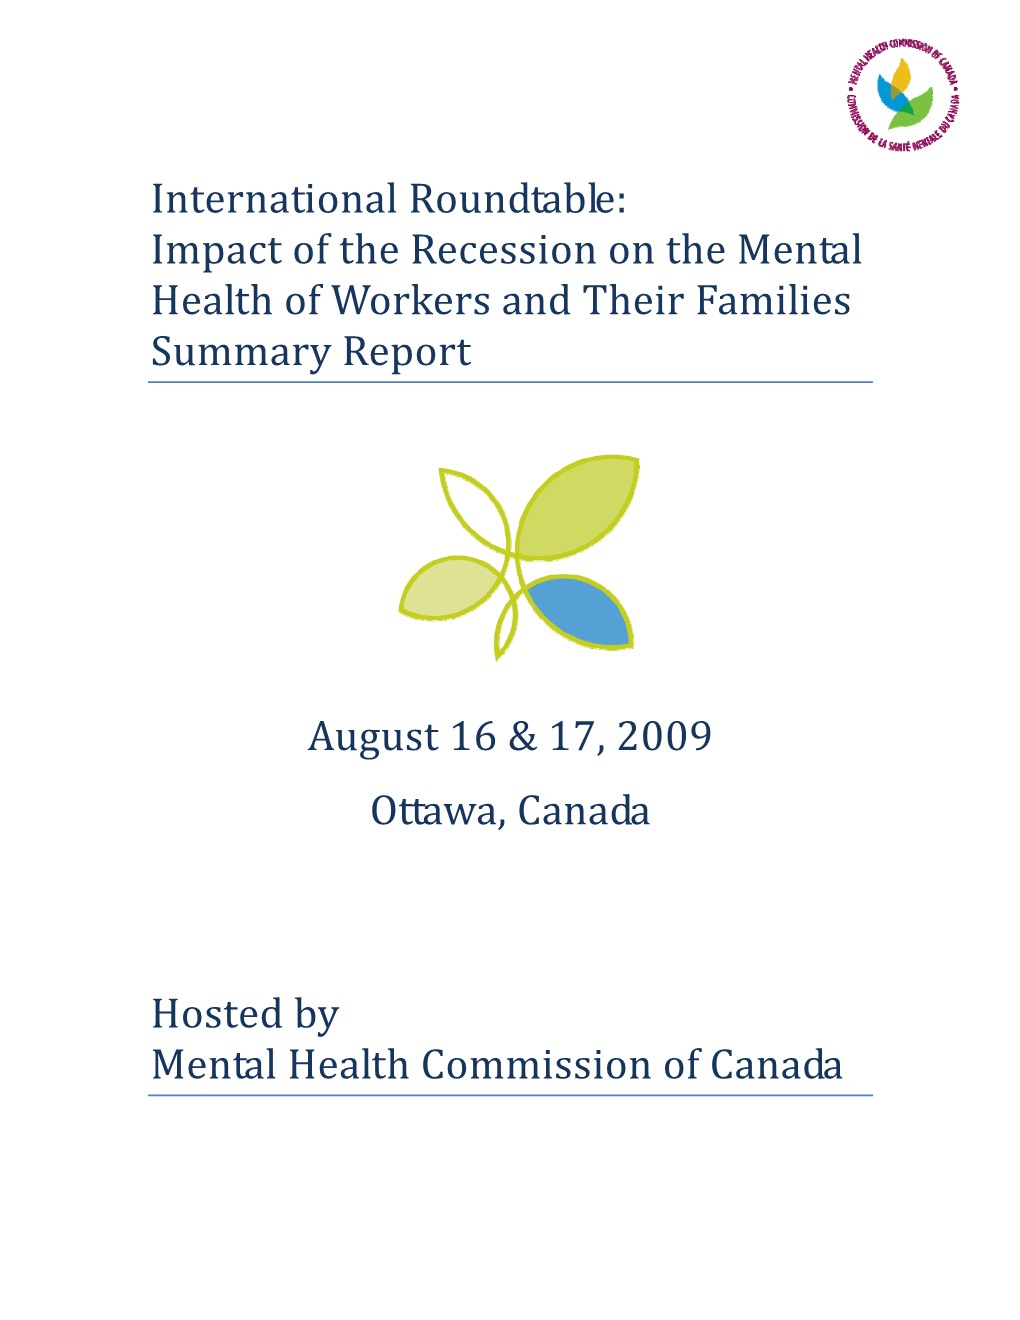 International Roundtable: Impact of the Recession on the Mental Health of Workers and Their Families Summary Report